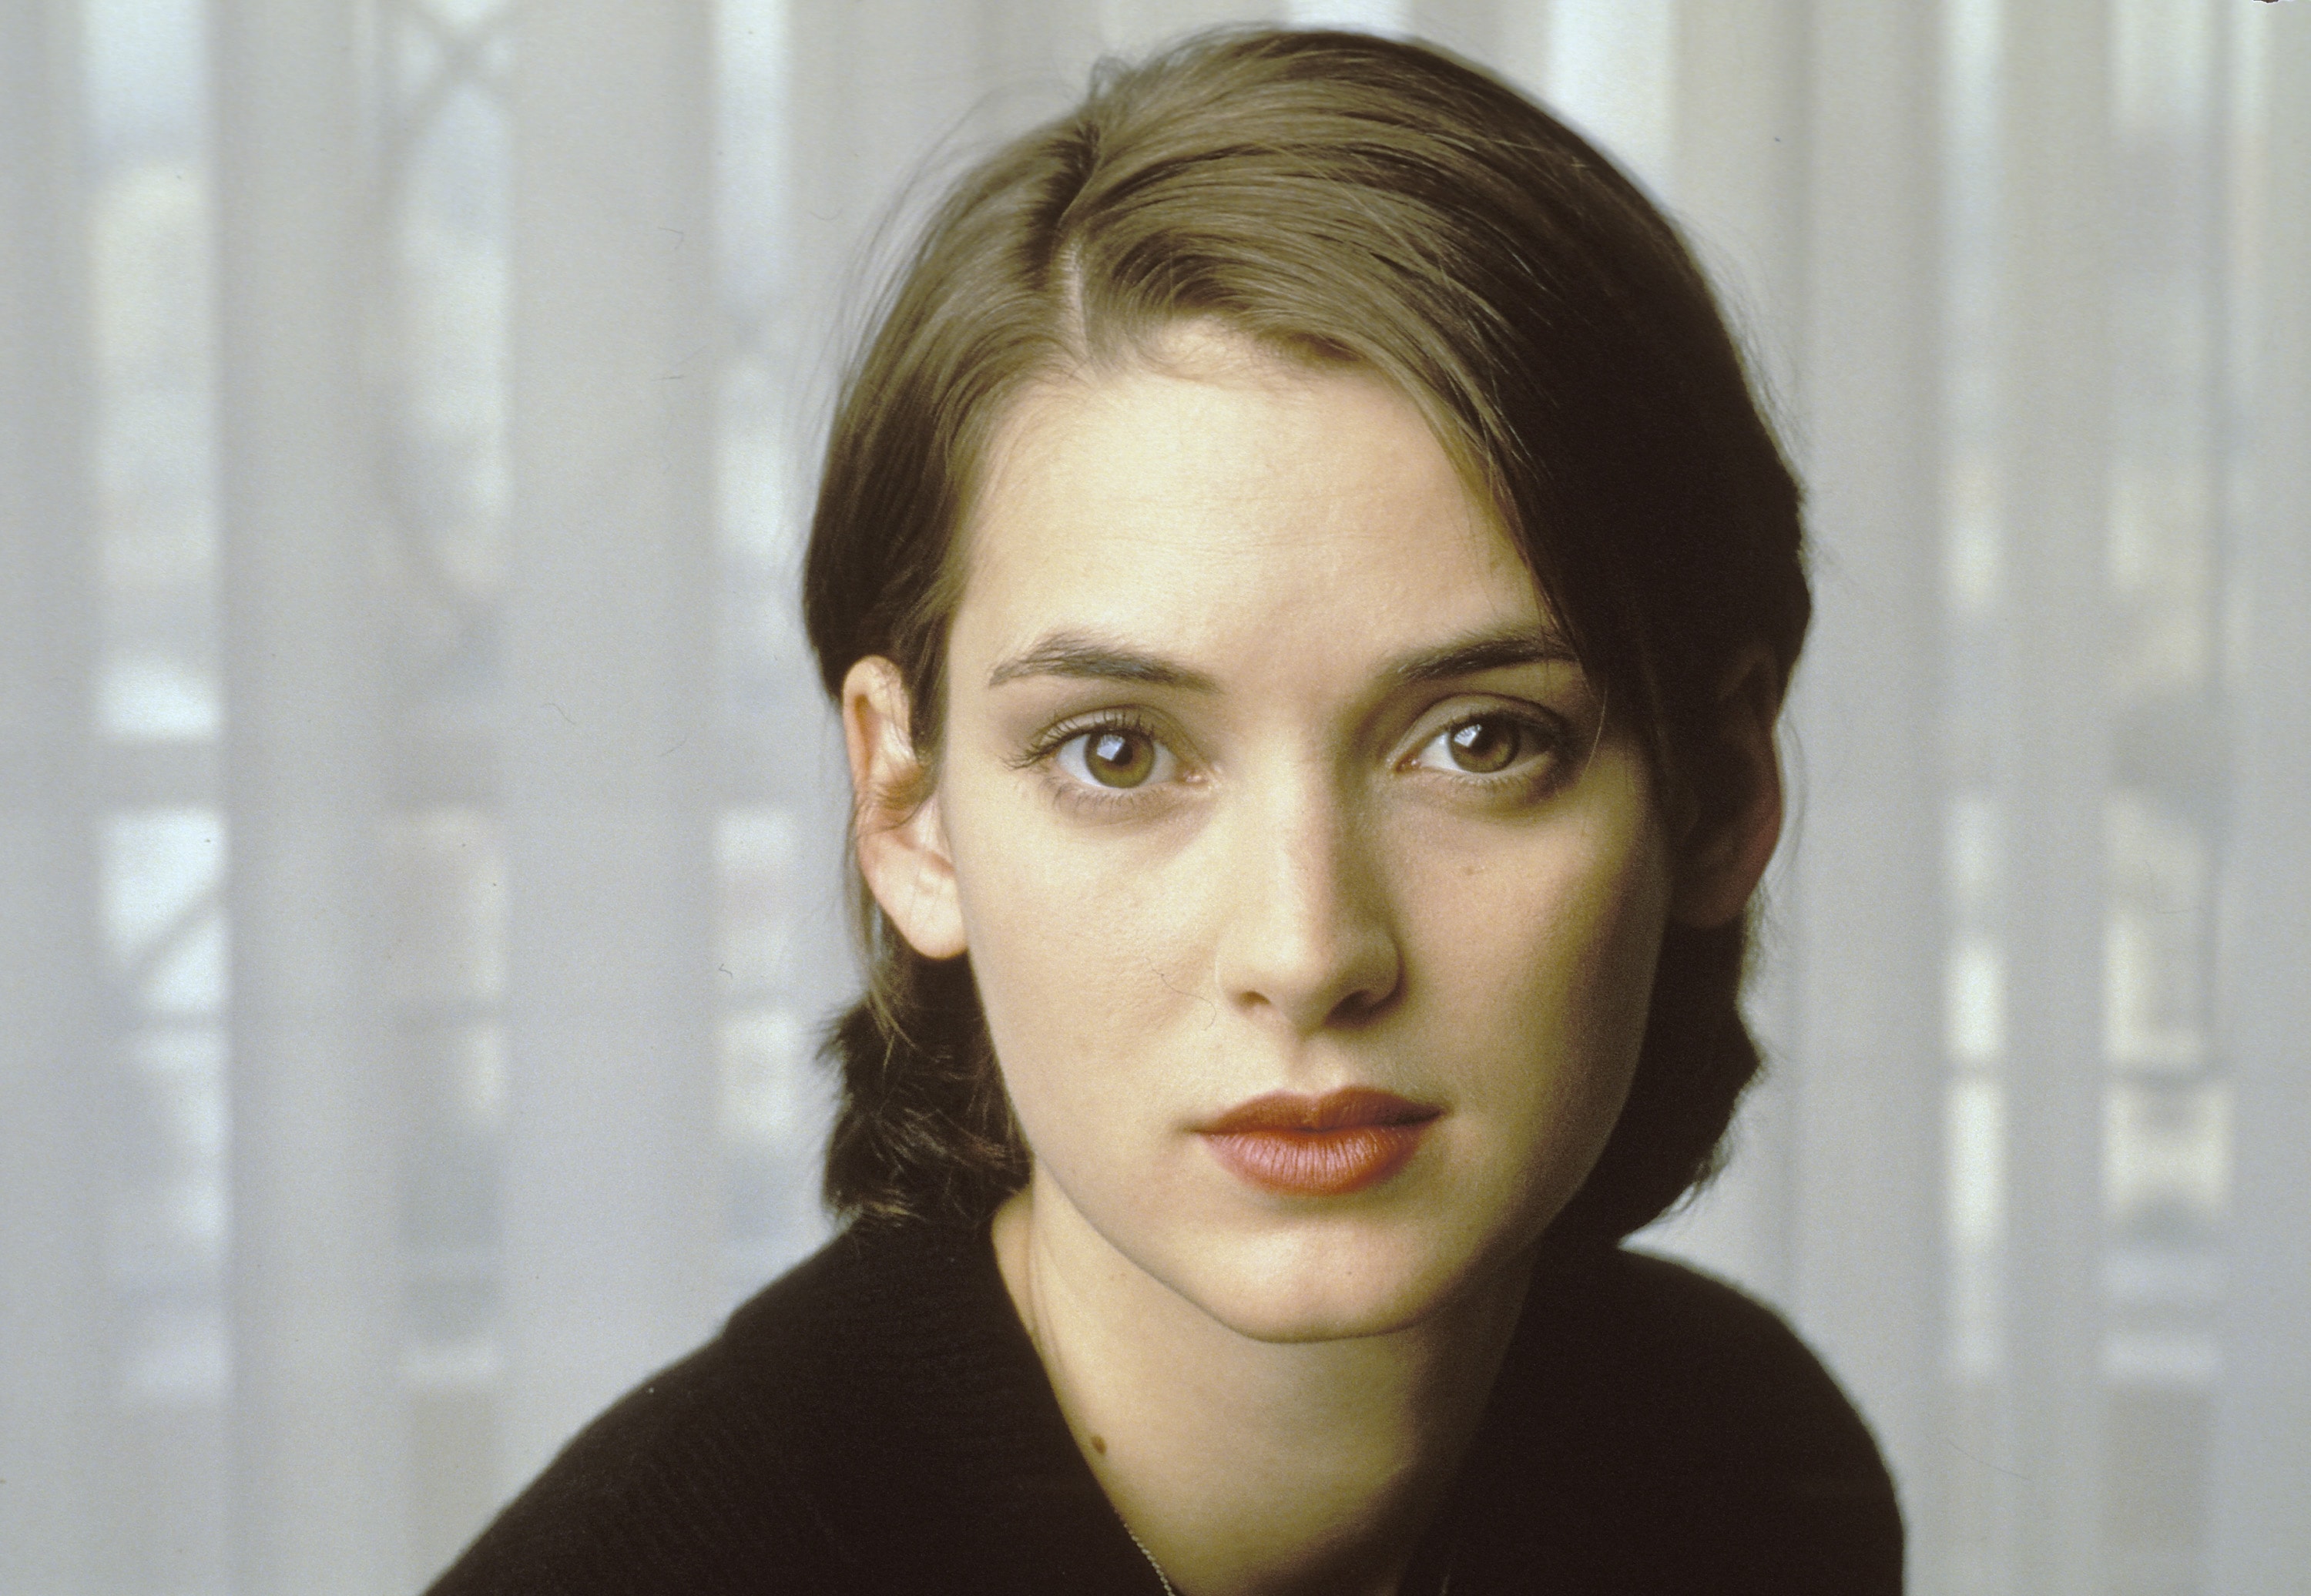 Winona Ryder Wallpapers Winona Ryder Widescreen Wallpapers - Winona Ryder Photoshoot 1995 , HD Wallpaper & Backgrounds